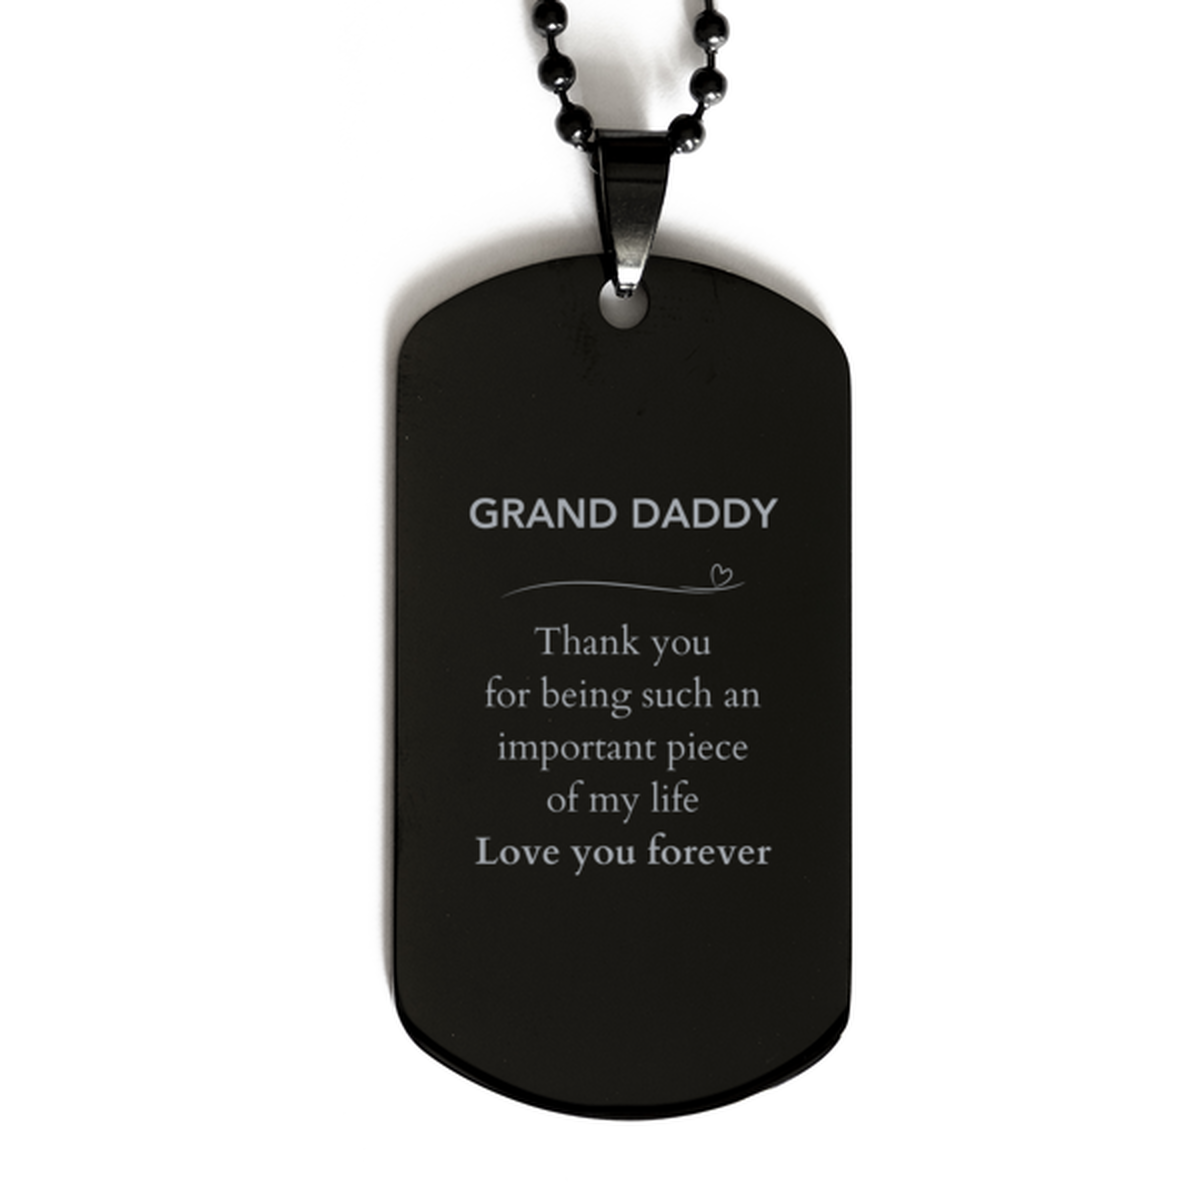 Appropriate Grand Daddy Black Dog Tag Epic Birthday Gifts for Grand Daddy Thank you for being such an important piece of my life Grand Daddy Christmas Mothers Fathers Day